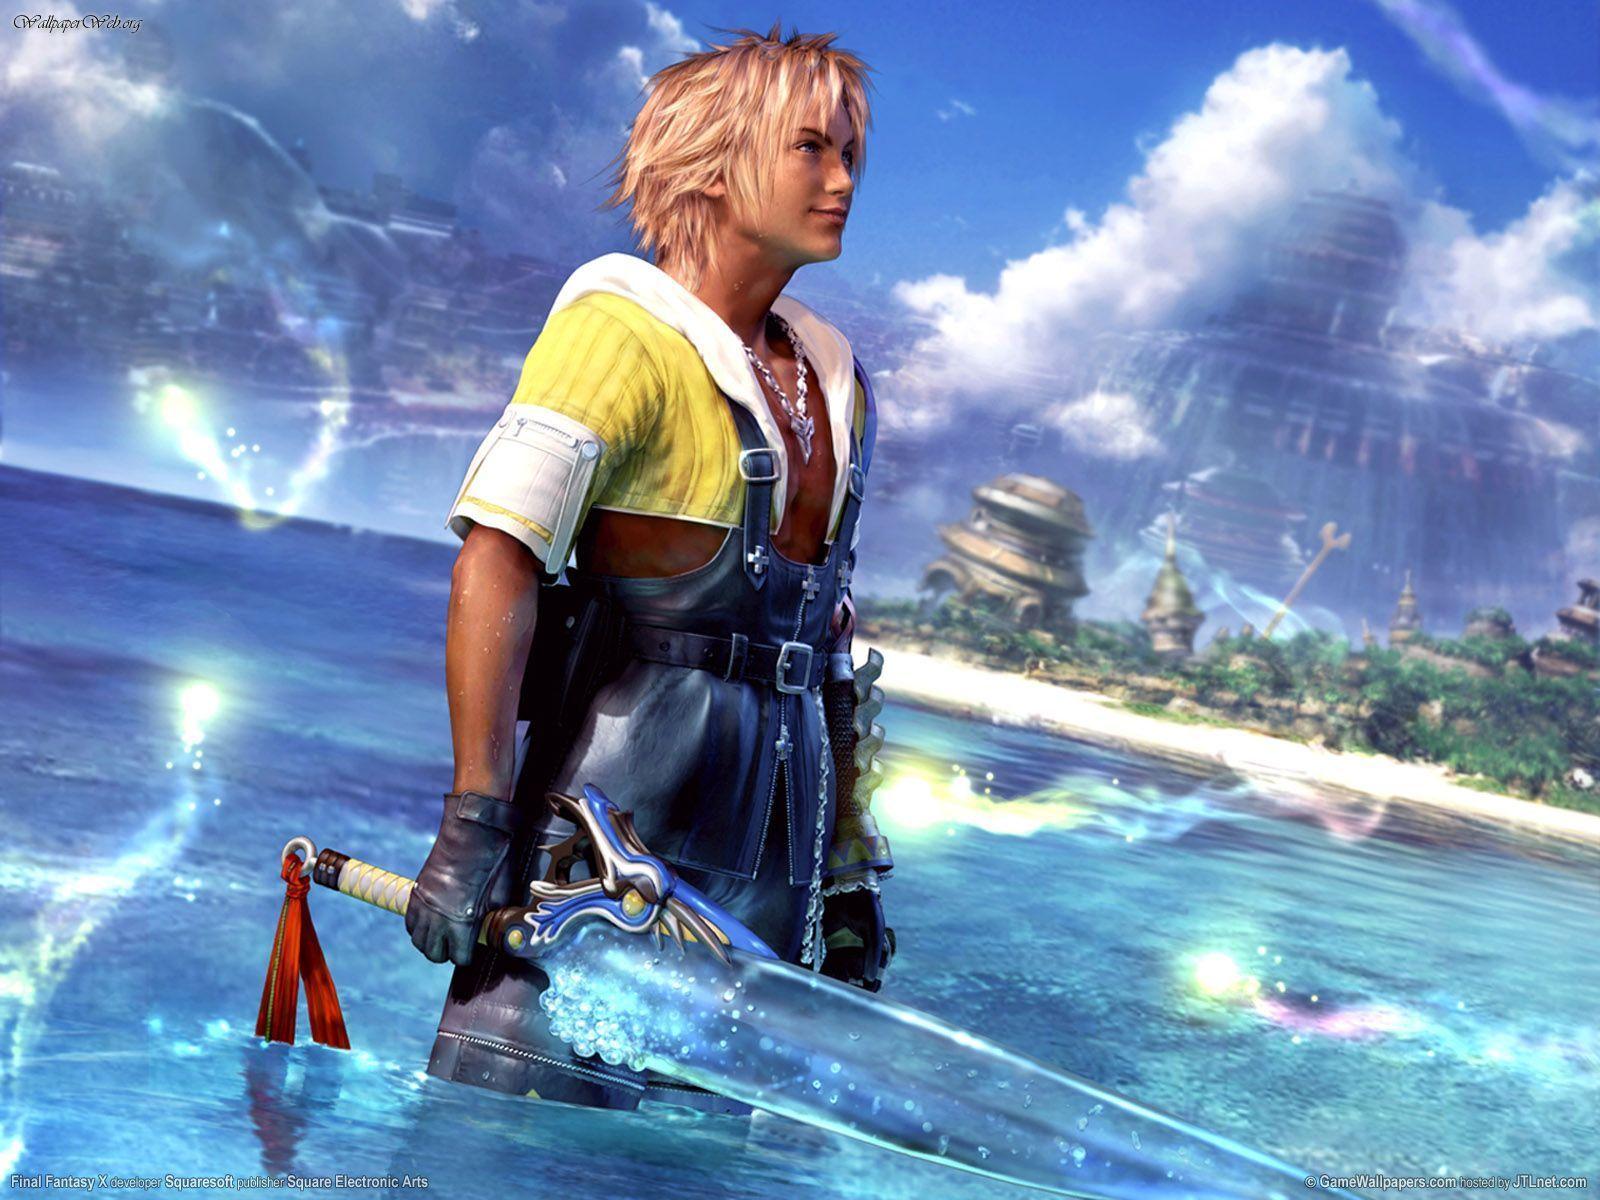 Games: Final Fantasy X, picture nr. 29585